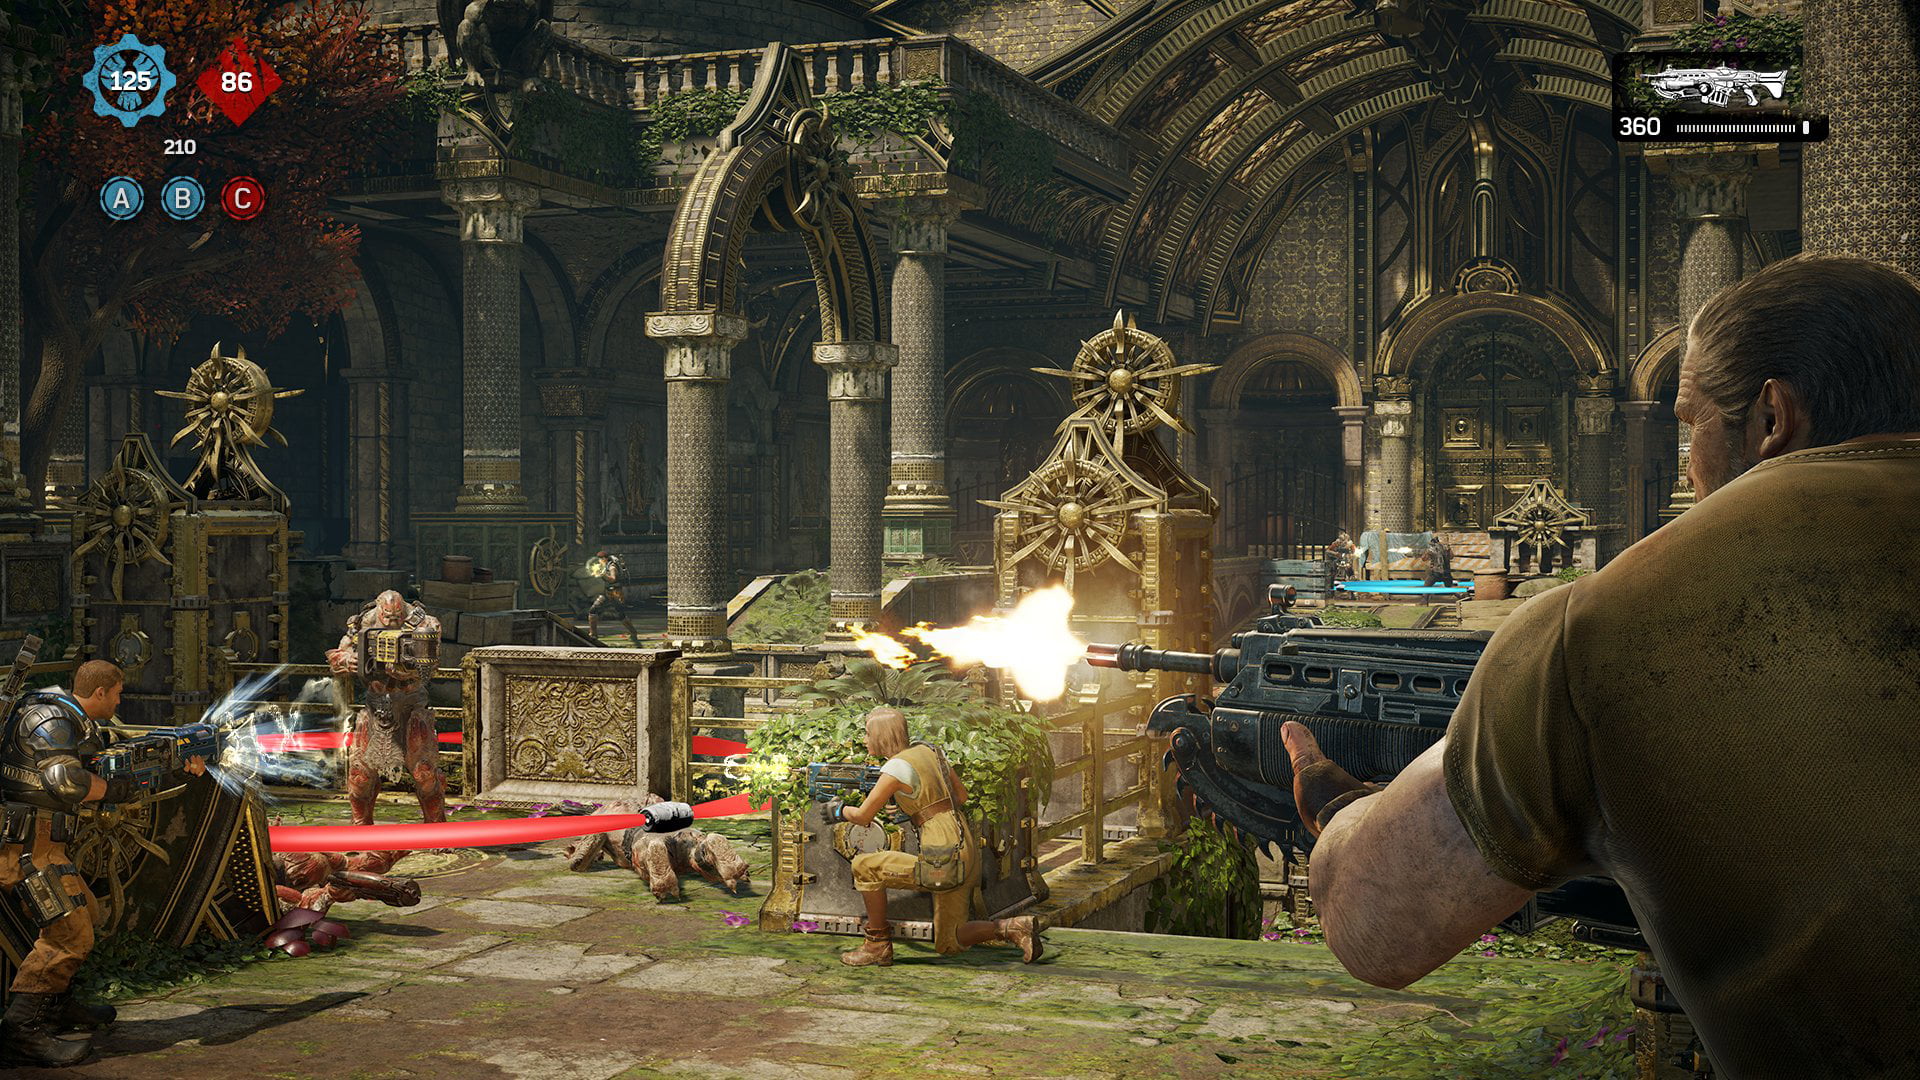 Gears of War 4 Bringing Xbox/PC Cross Play For Ranked Matches - mxdwn Games